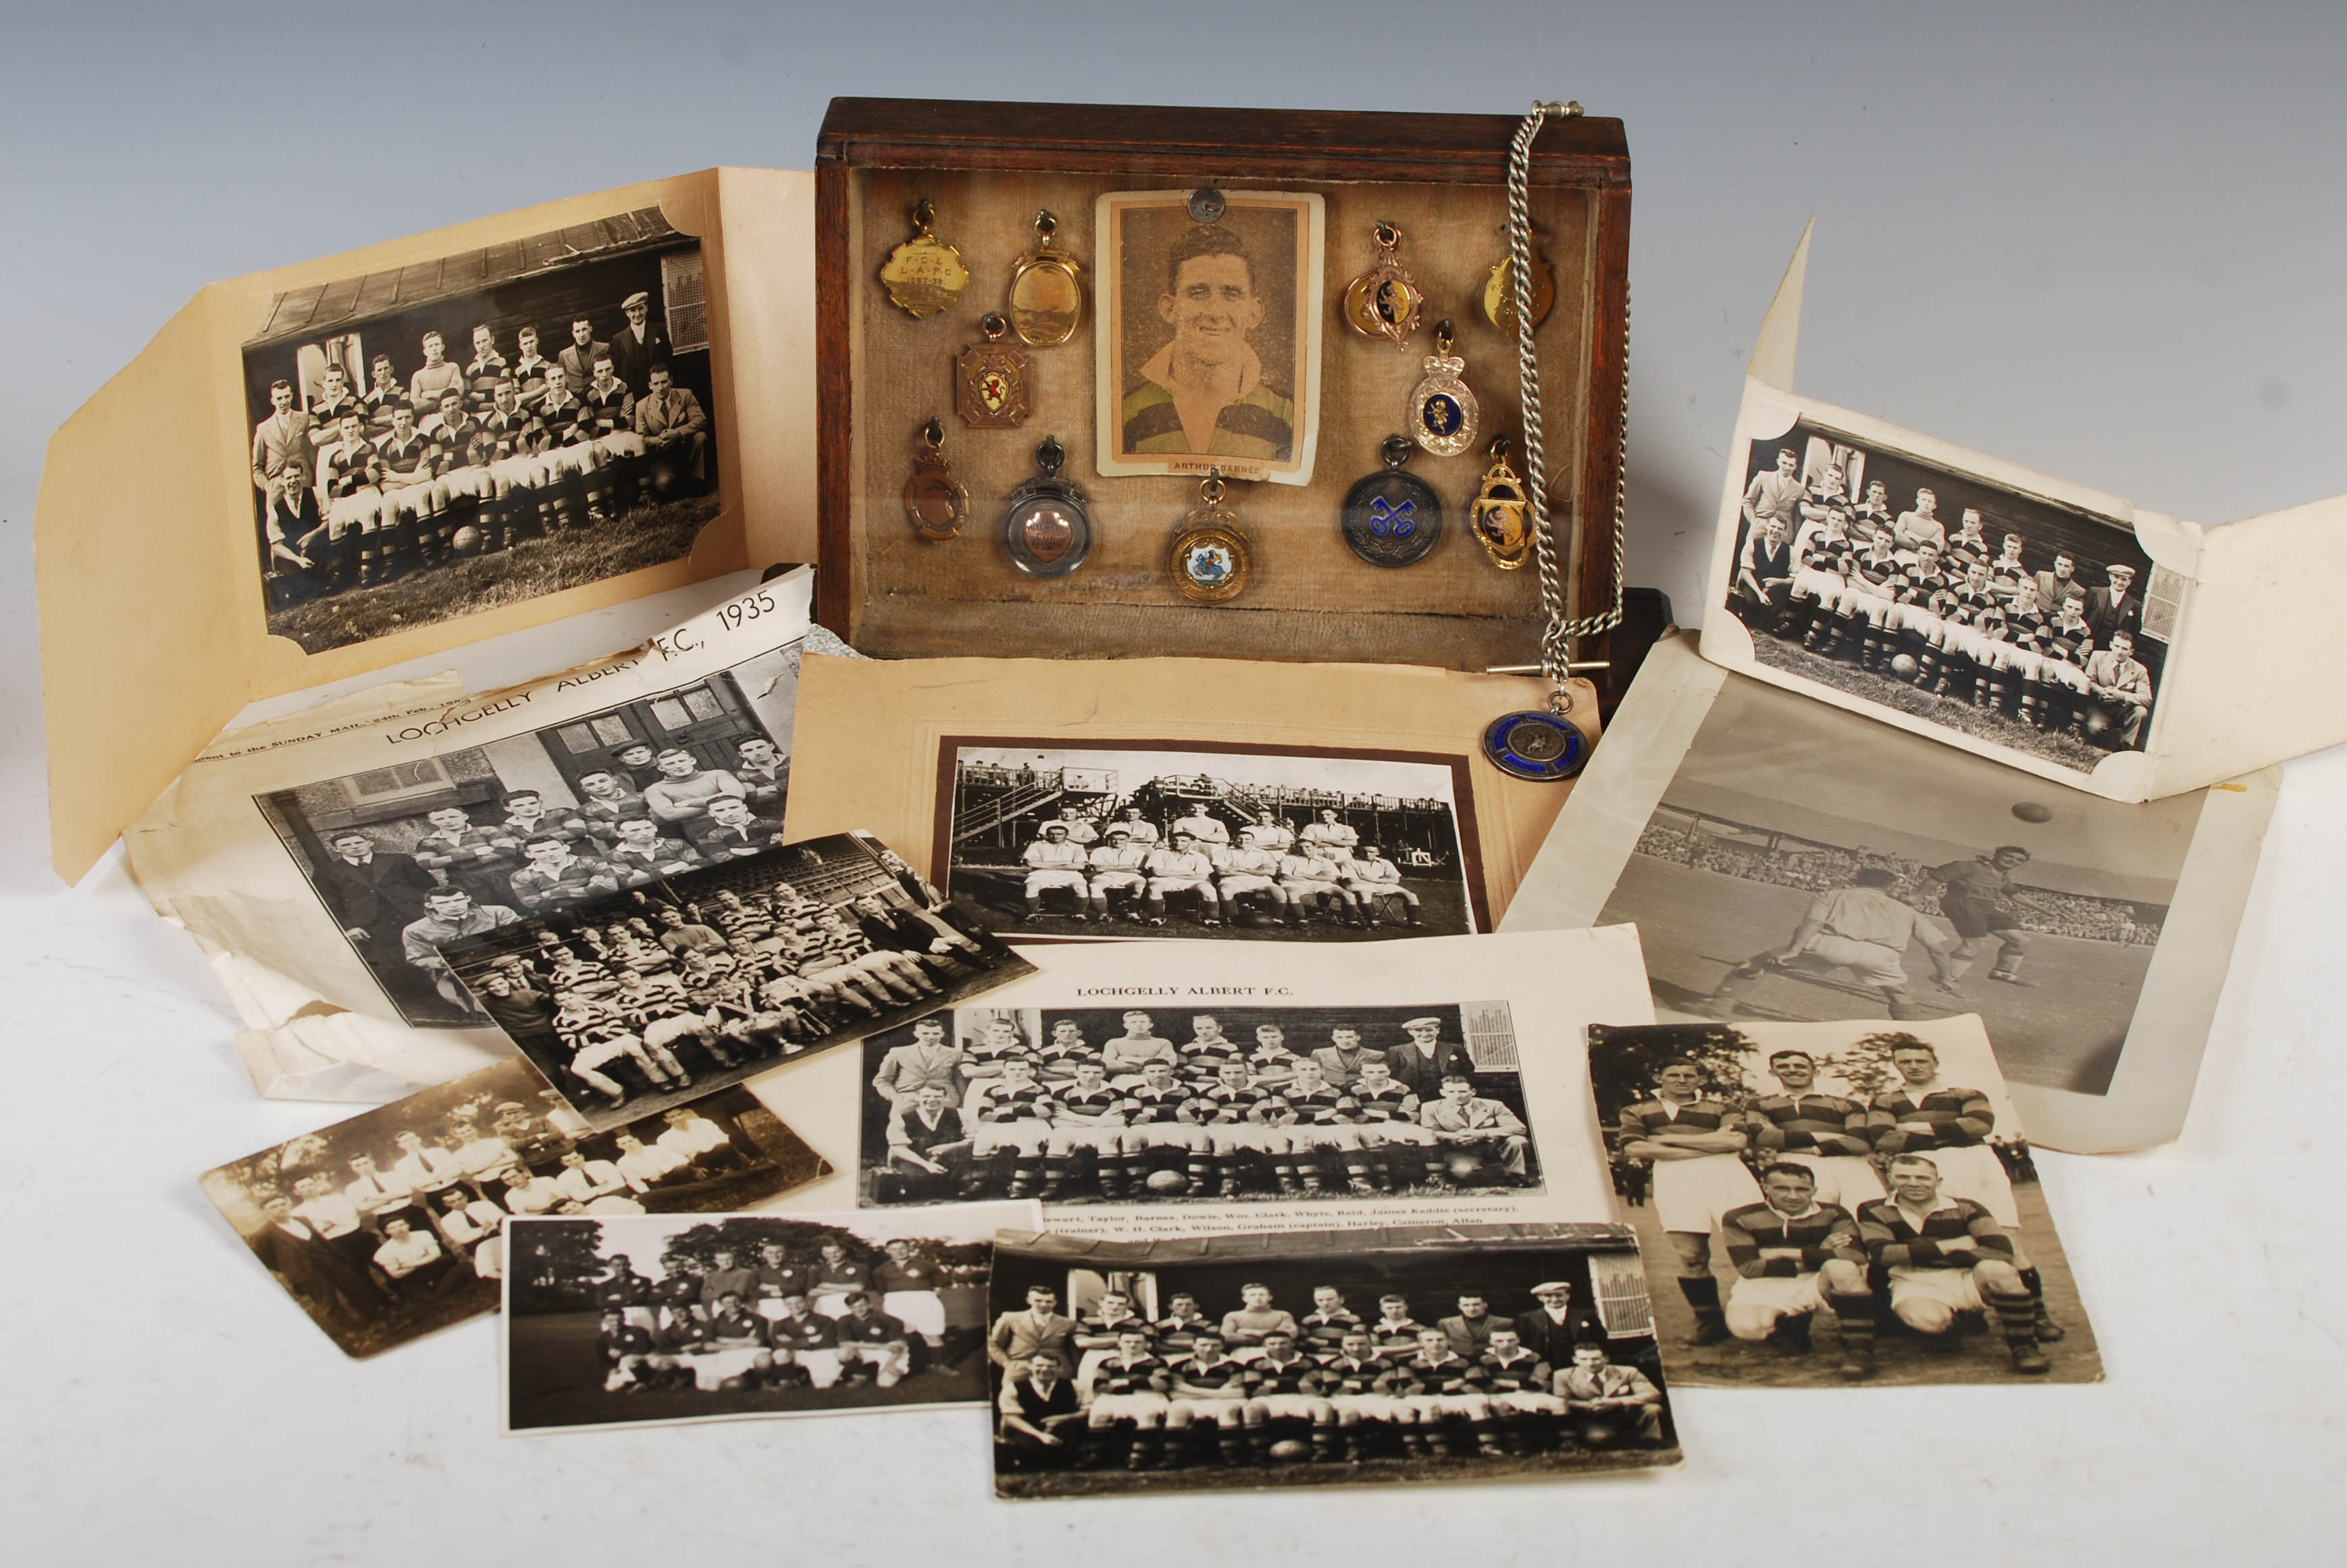 SCOTTISH FOOTBALL MEMORABILIA, A COLLECTION OF MEDALS AND PHOTOGRAPHS RELATING TO ARTHUR BARNES,